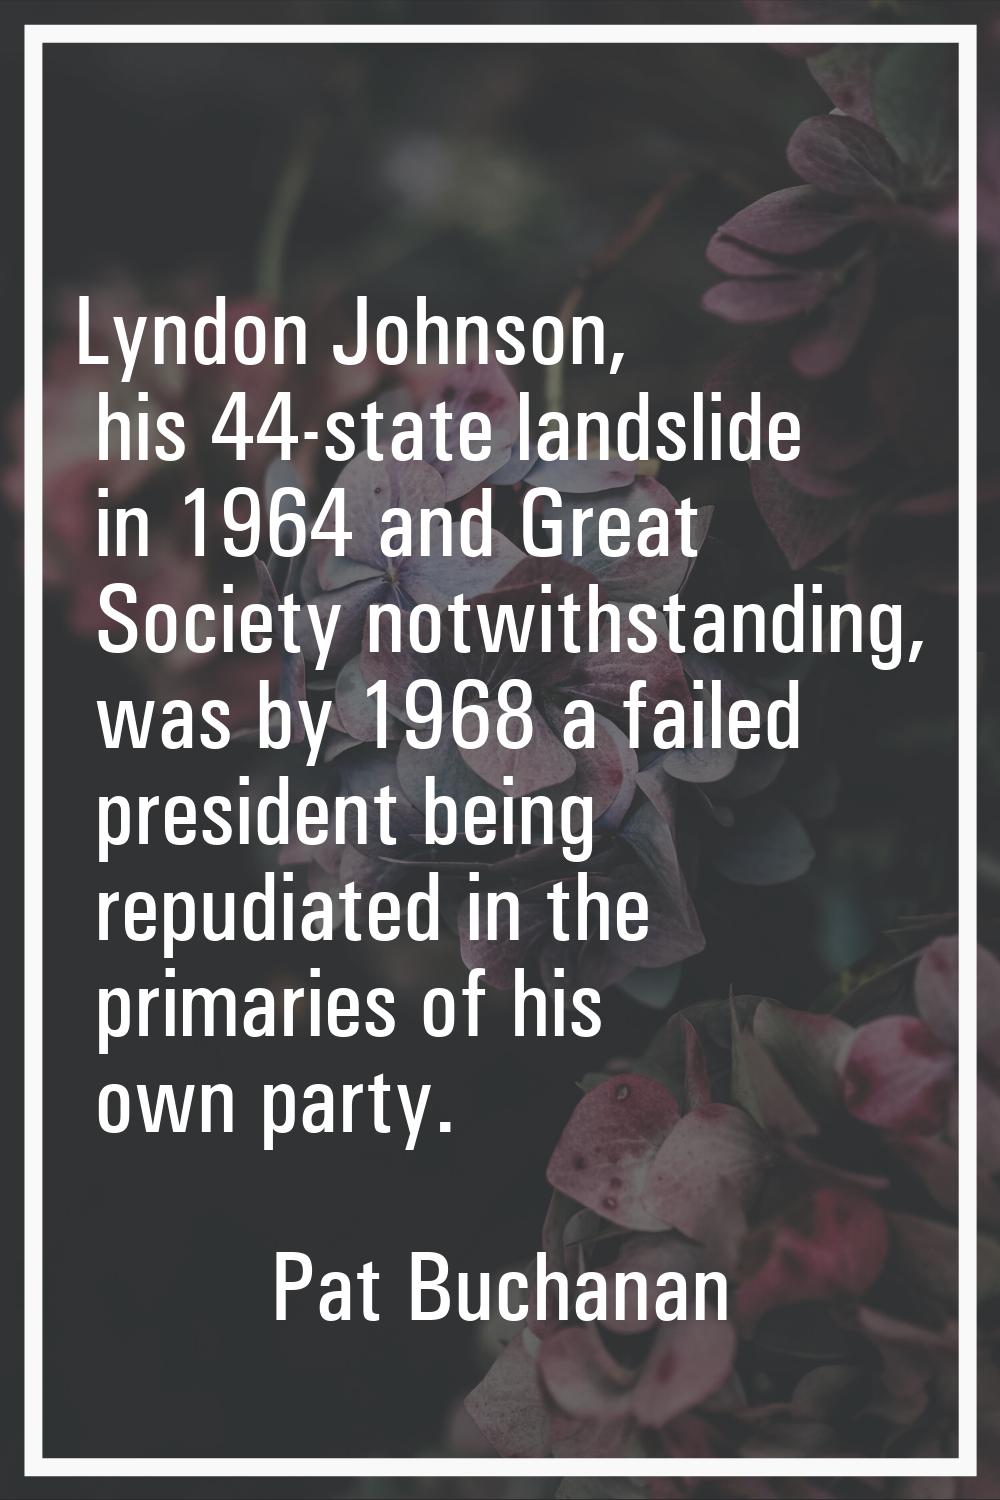 Lyndon Johnson, his 44-state landslide in 1964 and Great Society notwithstanding, was by 1968 a fai